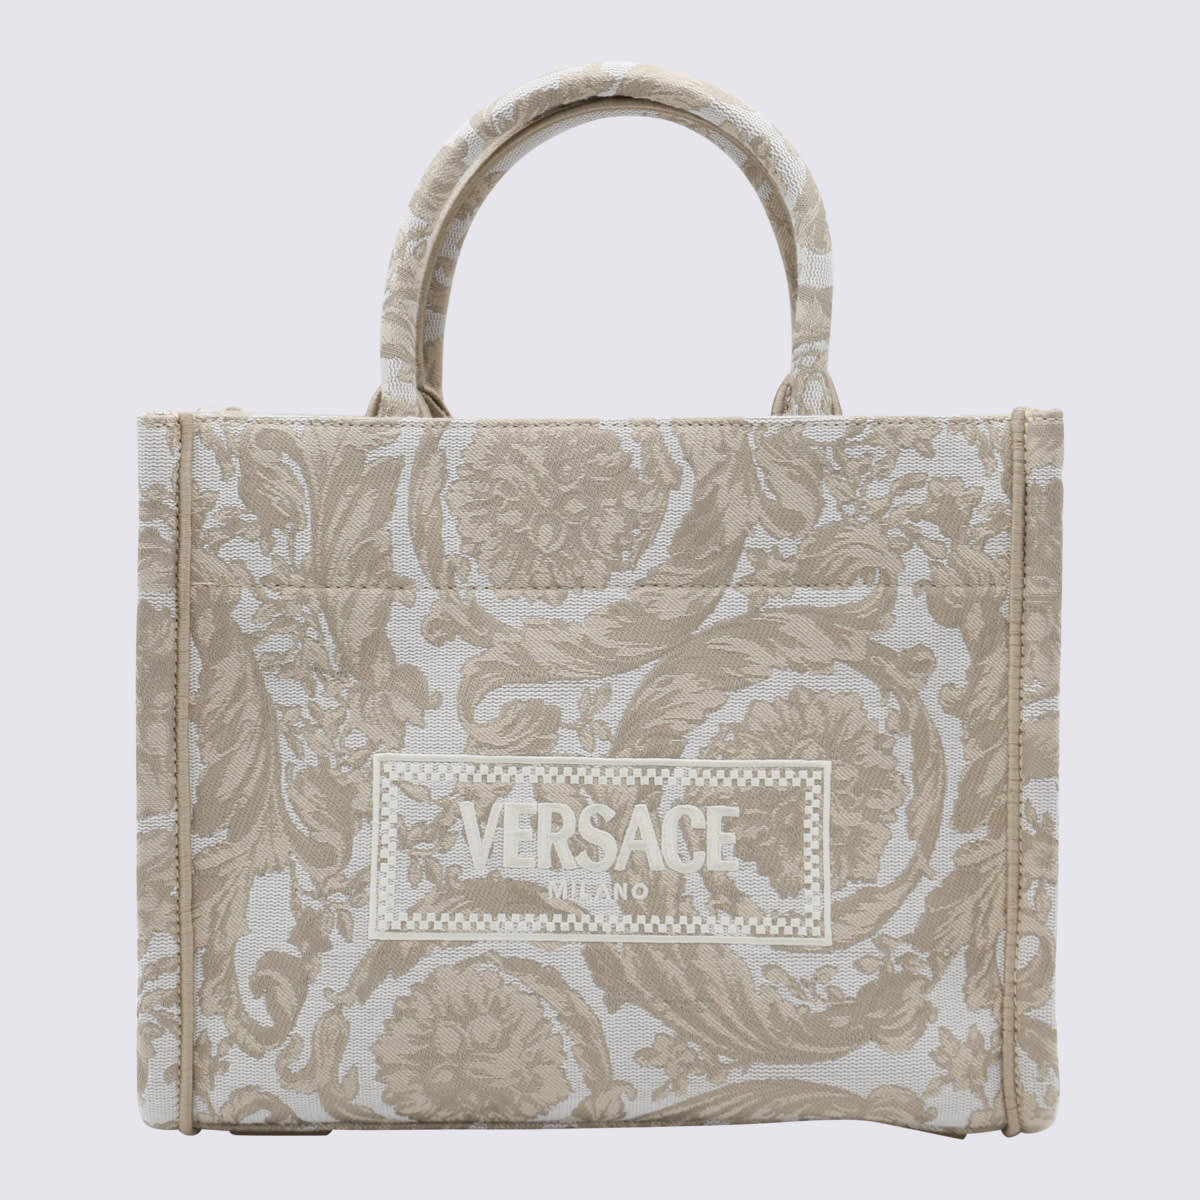 VERSACE BEIGE AND WHITE CANVAS BAROCCO ATHENA TOTE BAG